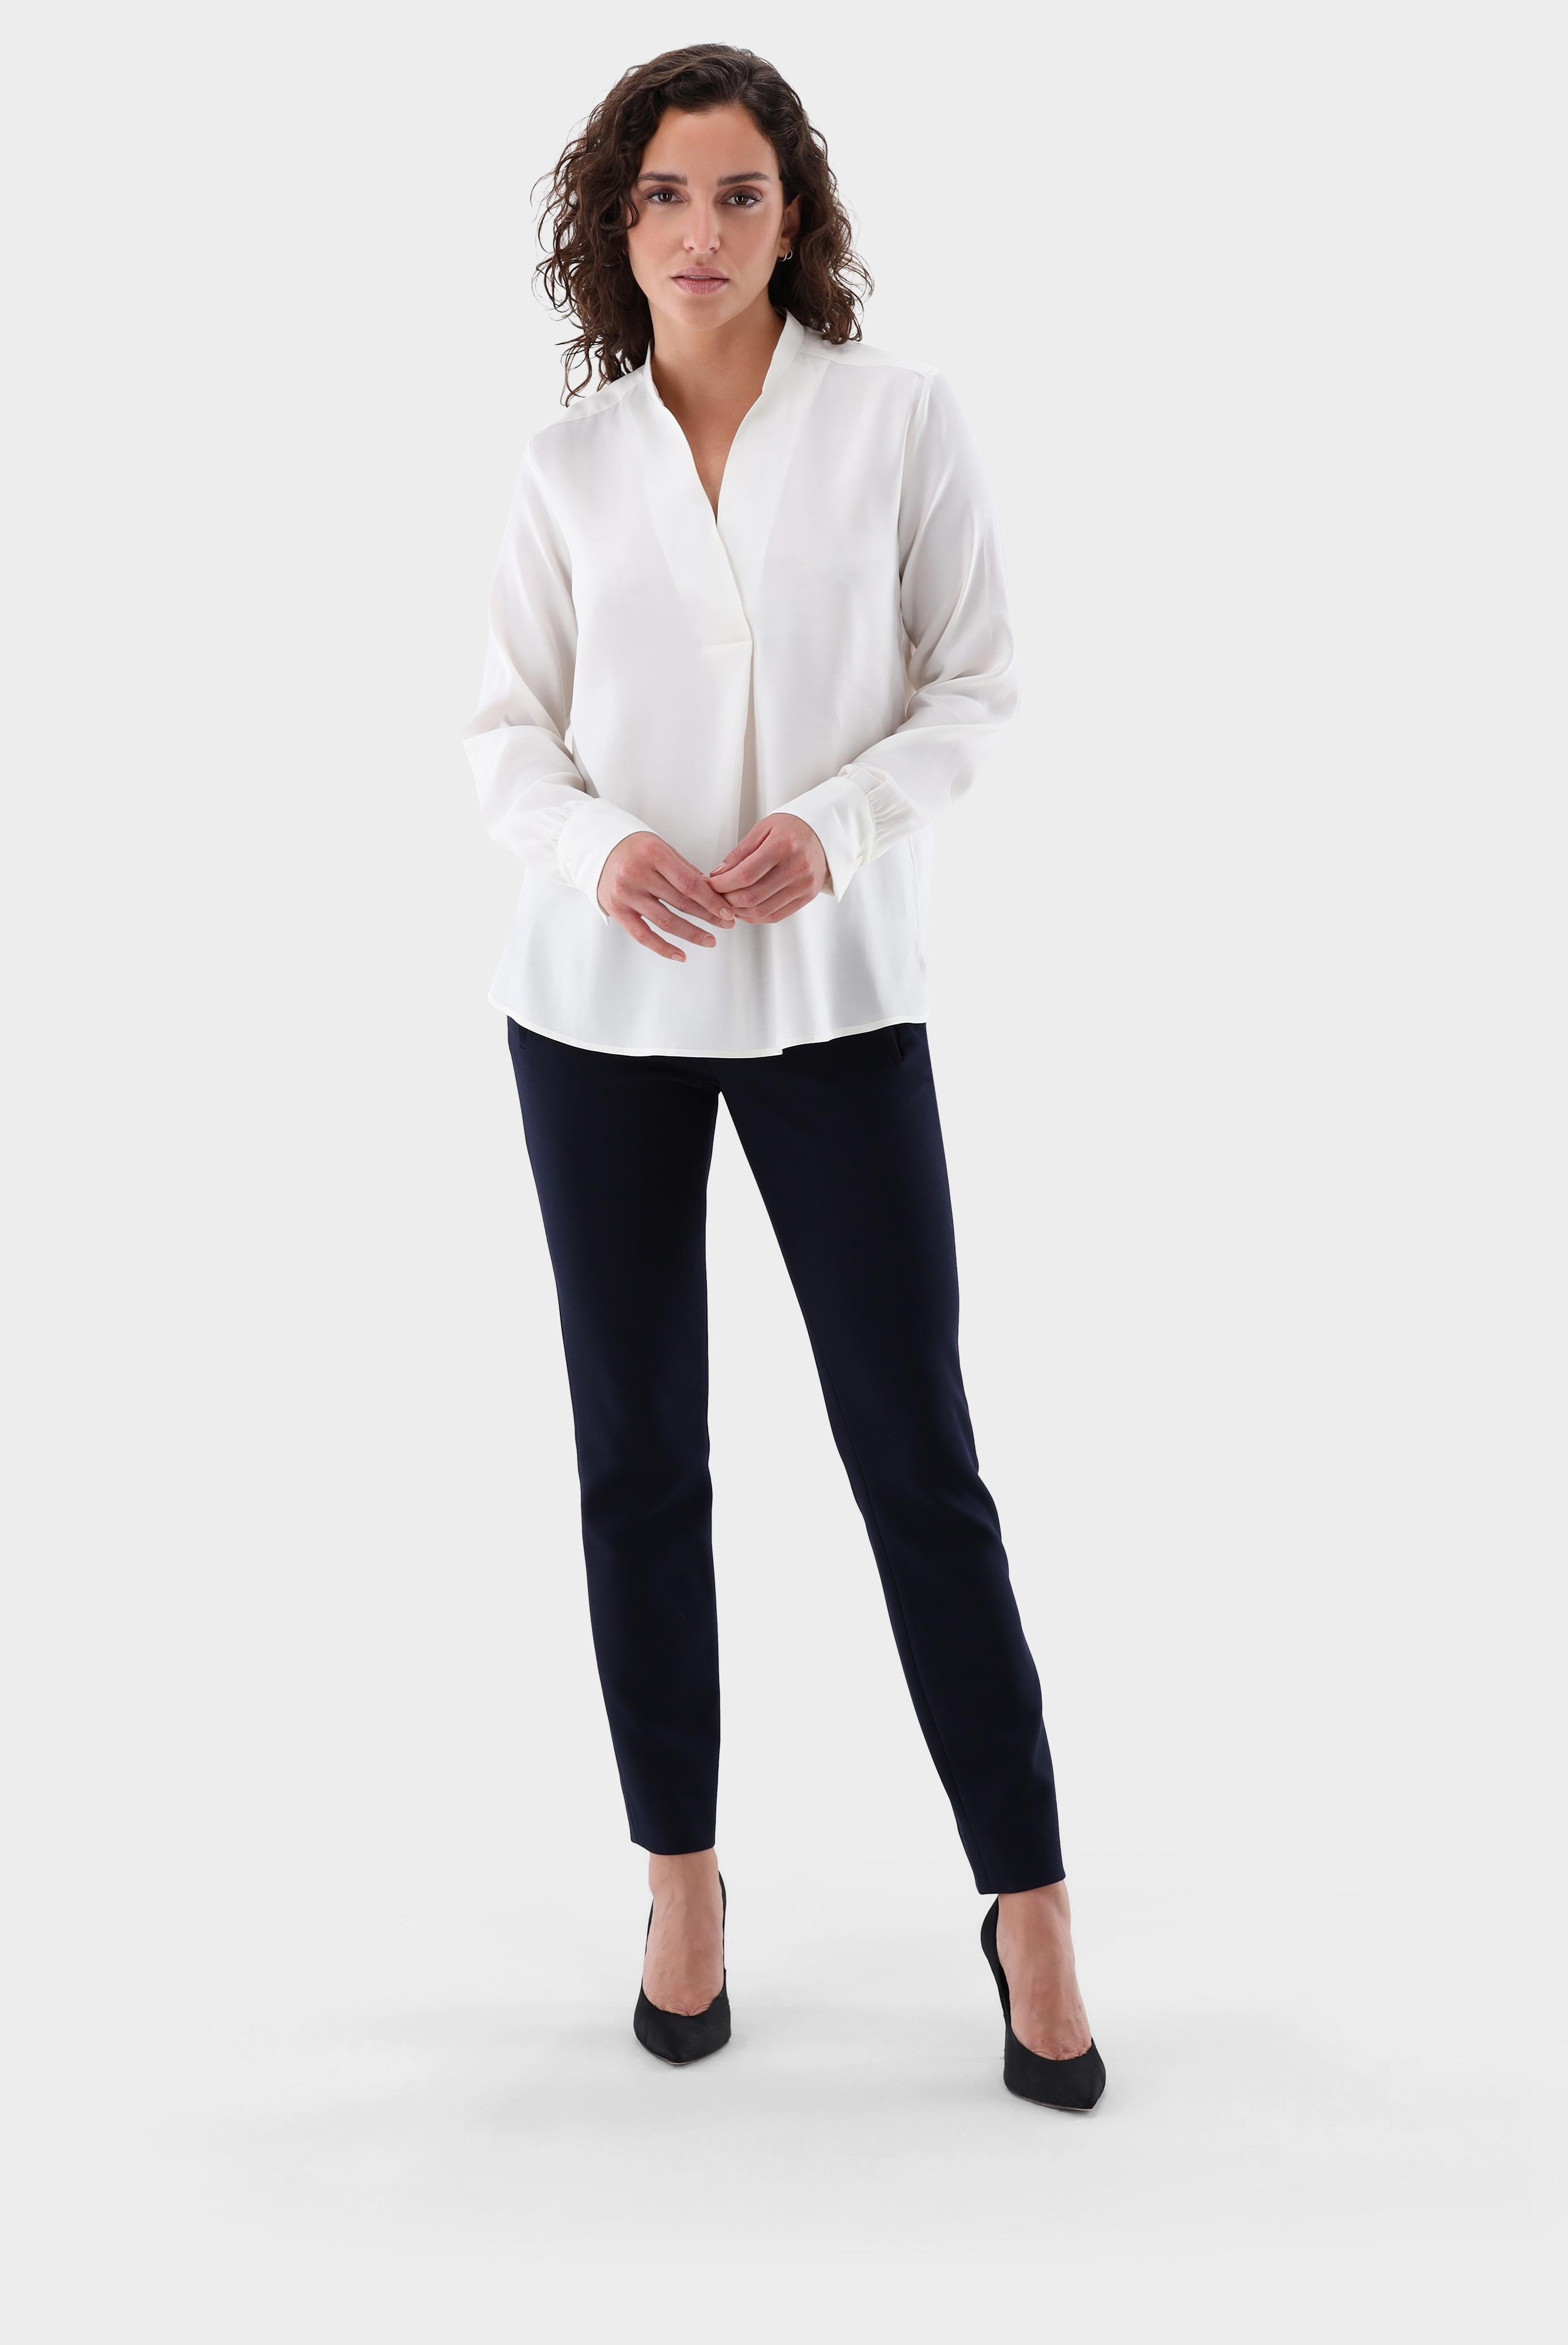 Casual Blouses+Stand-up Collar Shirt with lyocell and cotton+05.527Y.49.150258.100.34